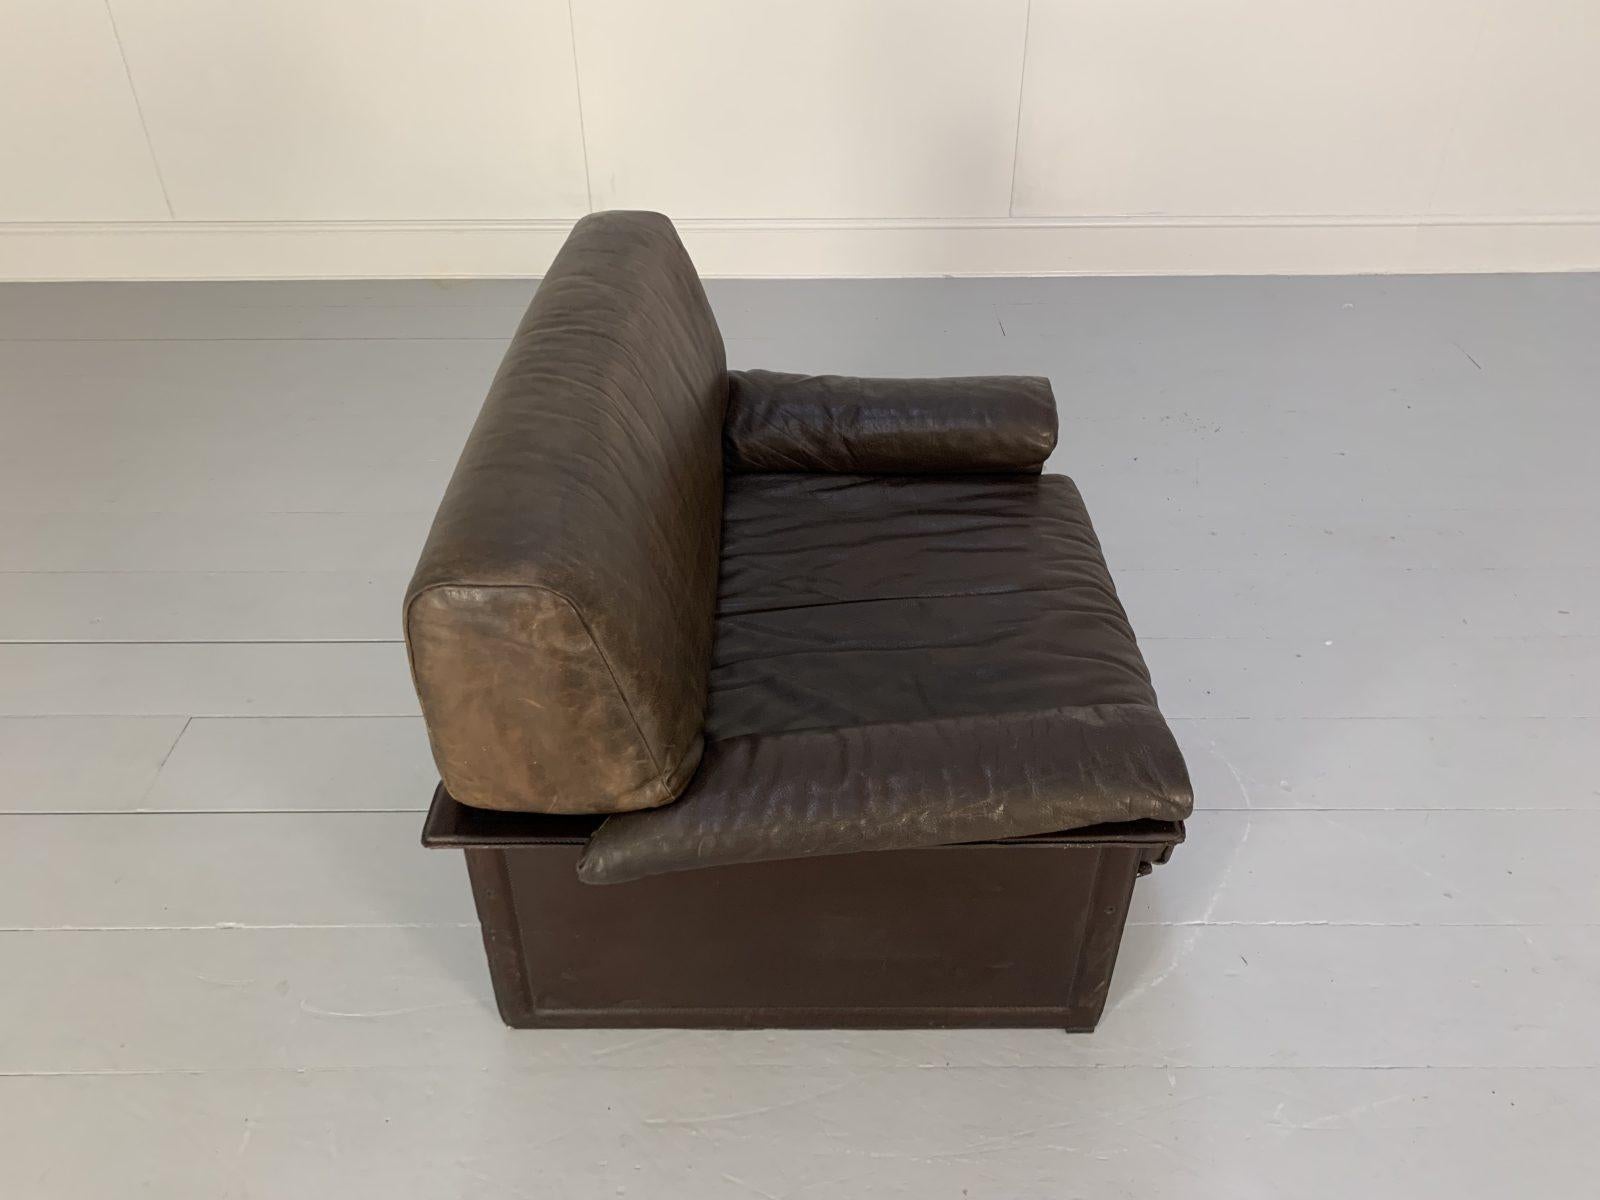 Pair of Matteo Grassi “Tm” Armchairs – in Vintage Brown Leather For Sale 8